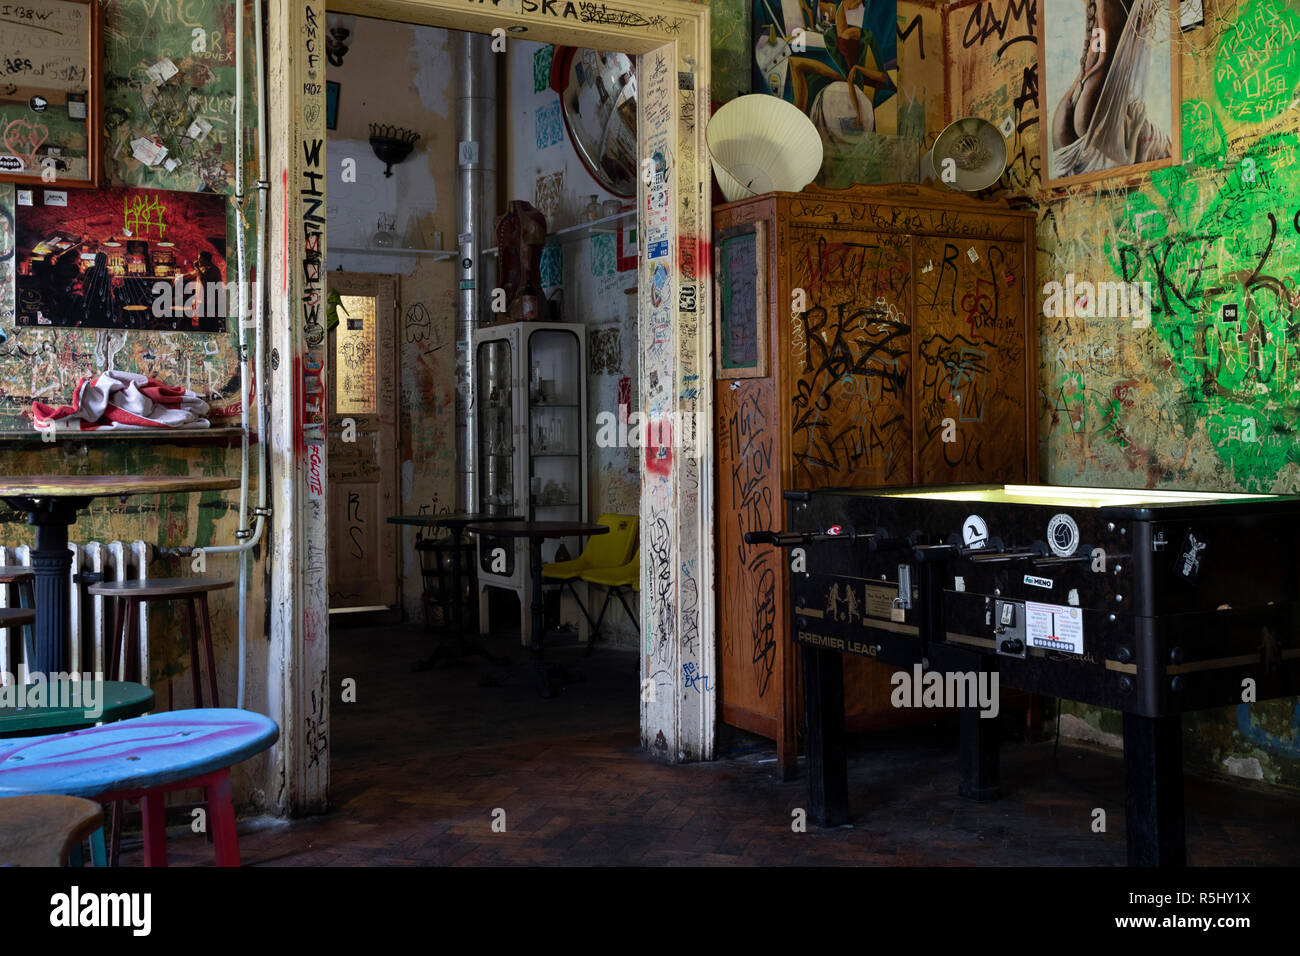 BUDAPEST, HUNGARY - August 12, 2018: Pub interiors with vintage furniture in Szimpla kert ruin pub and farmers market, a popular tourist destinations  Stock Photo